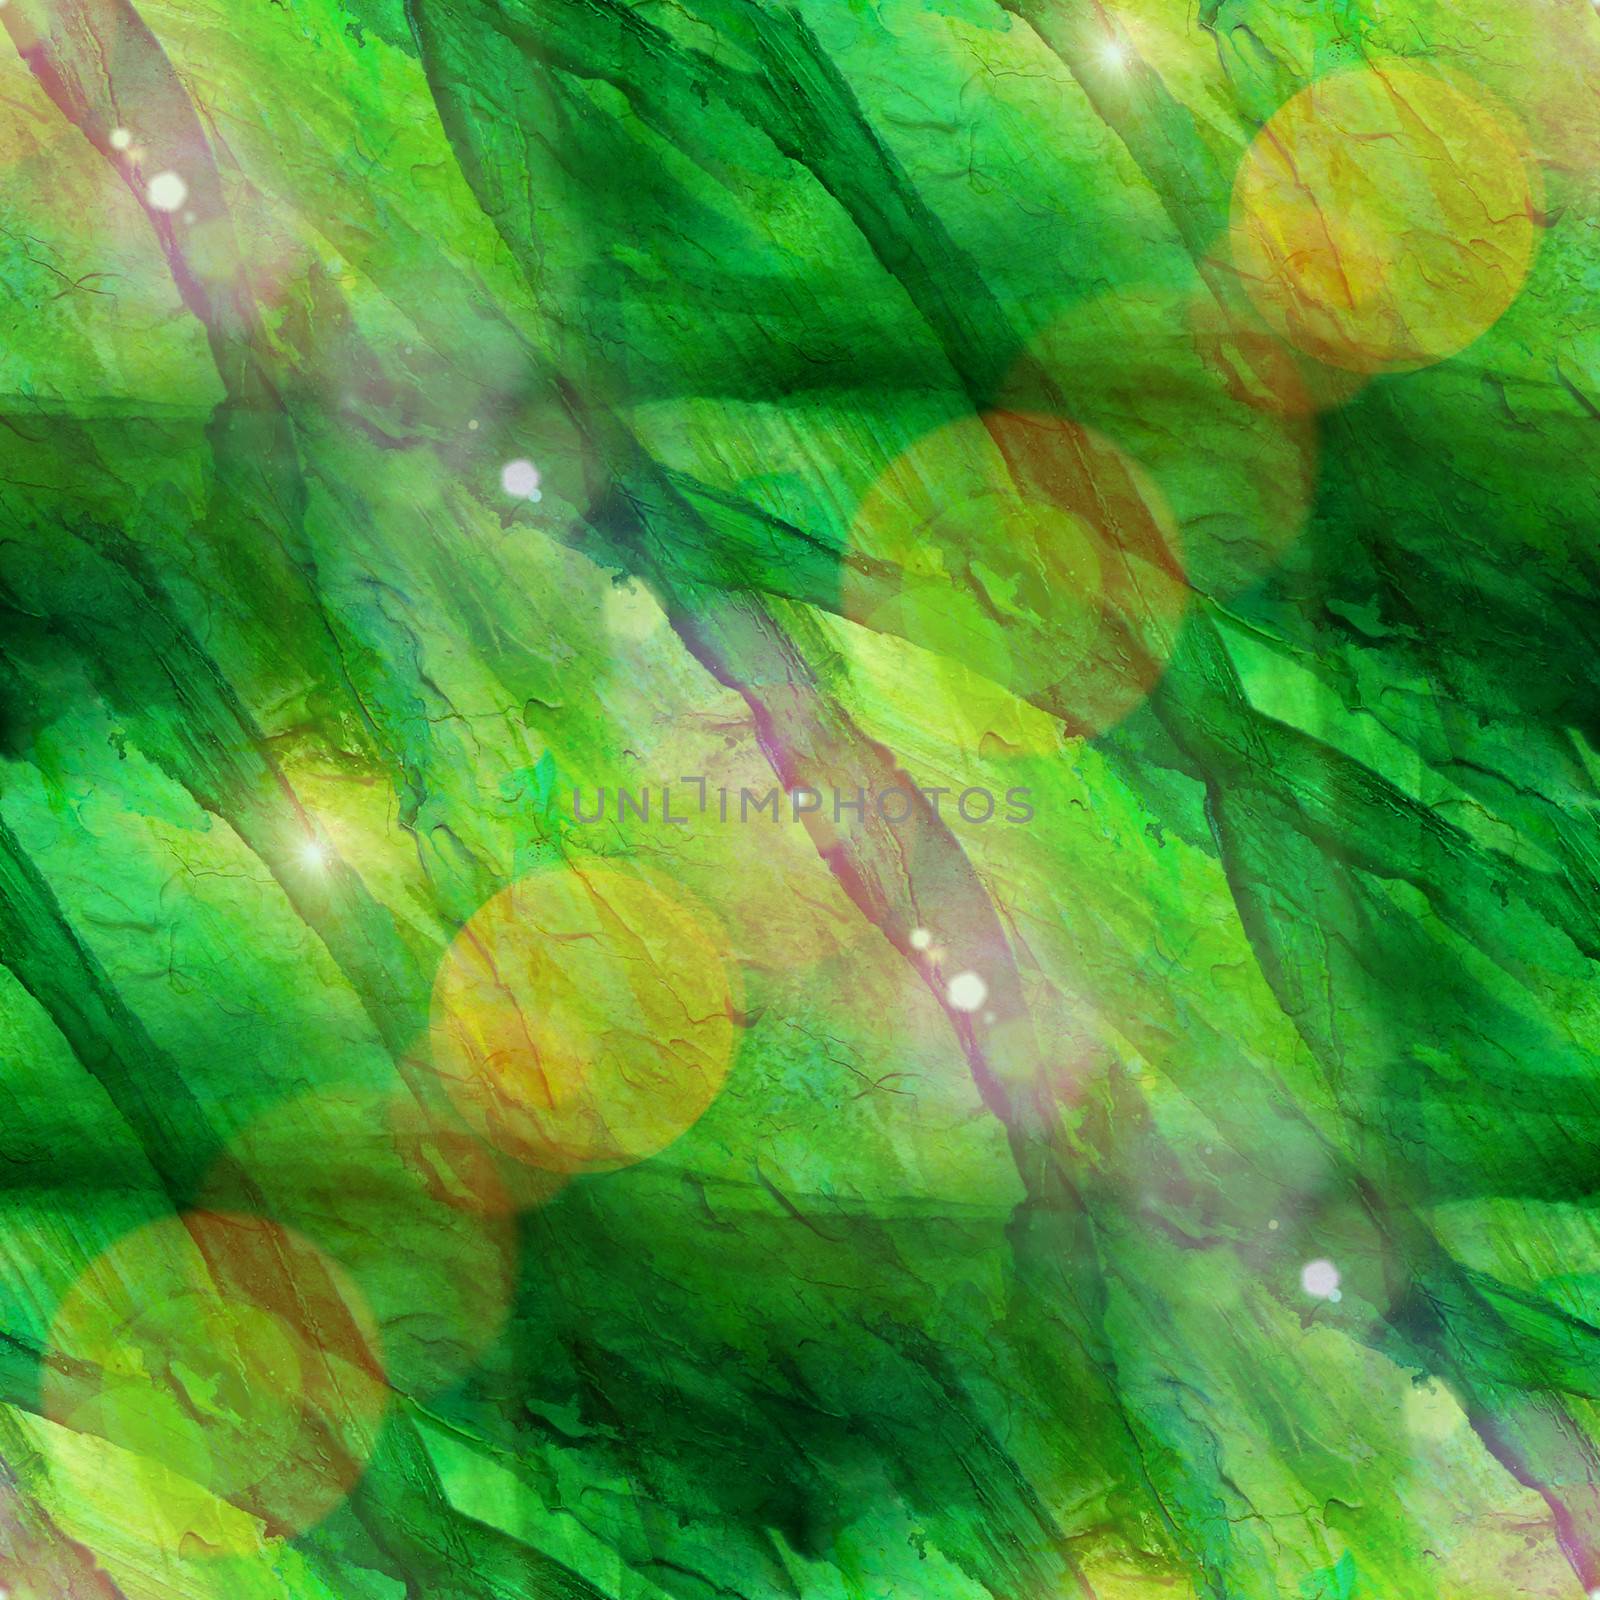 sun glare background green watercolor art seamless texture abstract brush